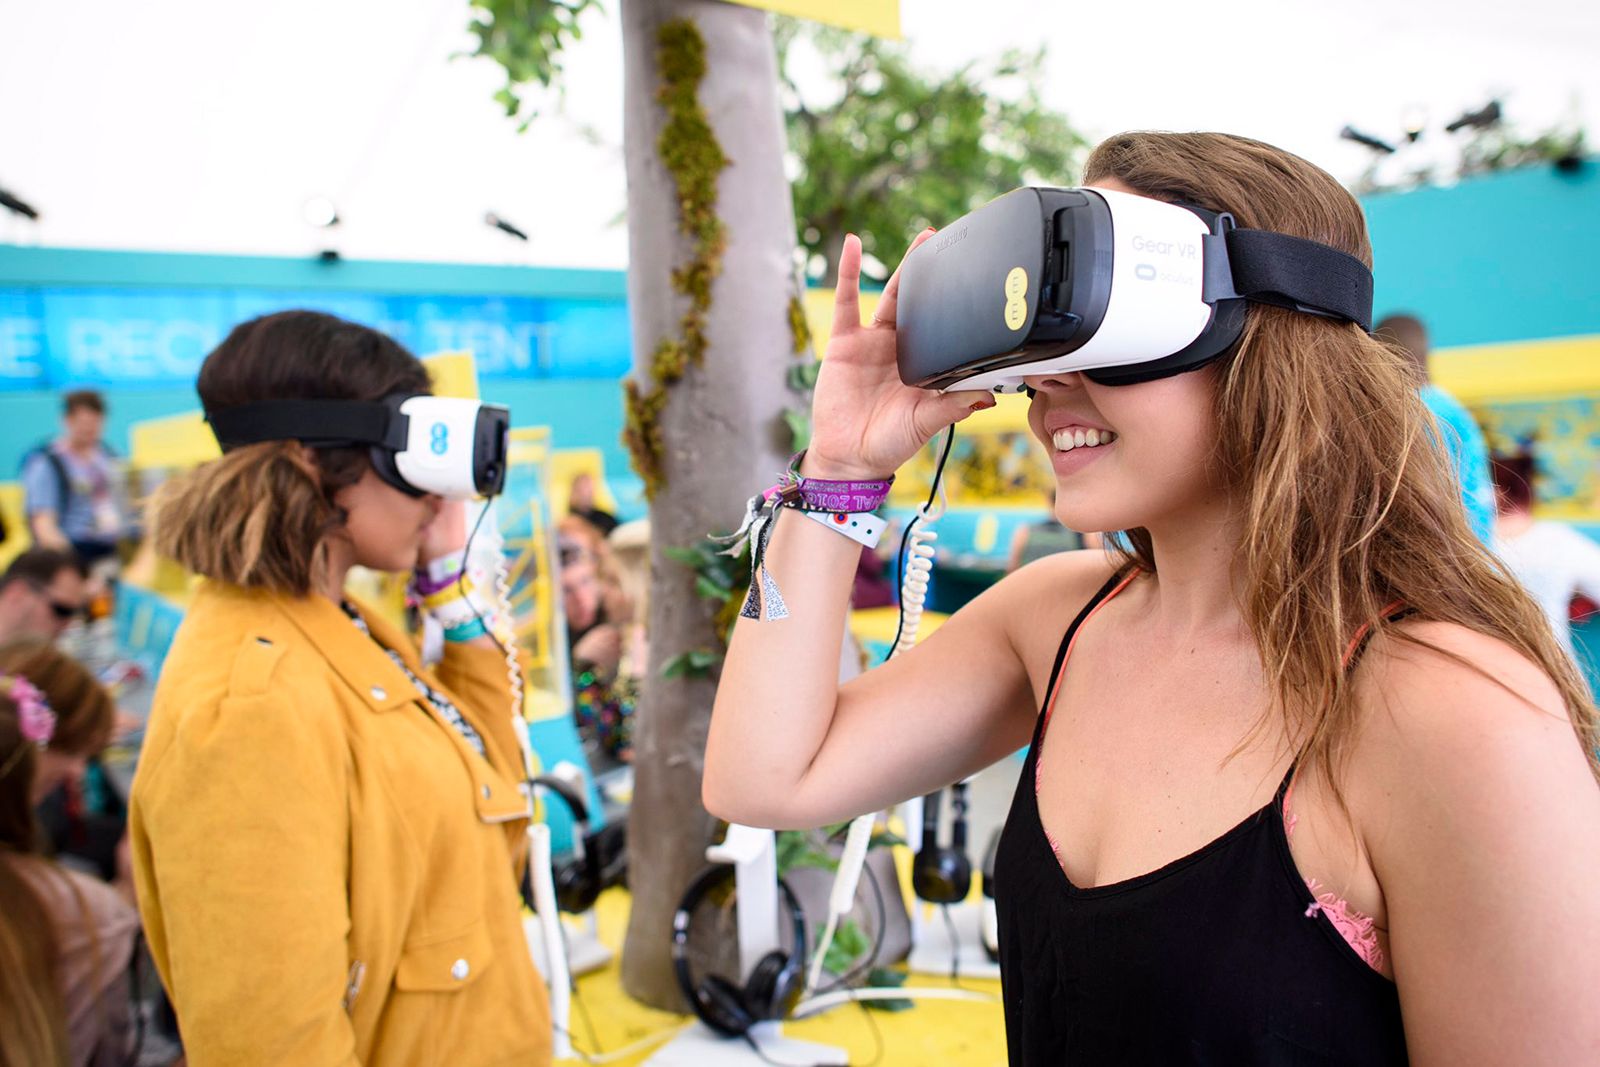 glastonbury 2016 to be filmed in vr by ee festival fun in 360 degrees image 1